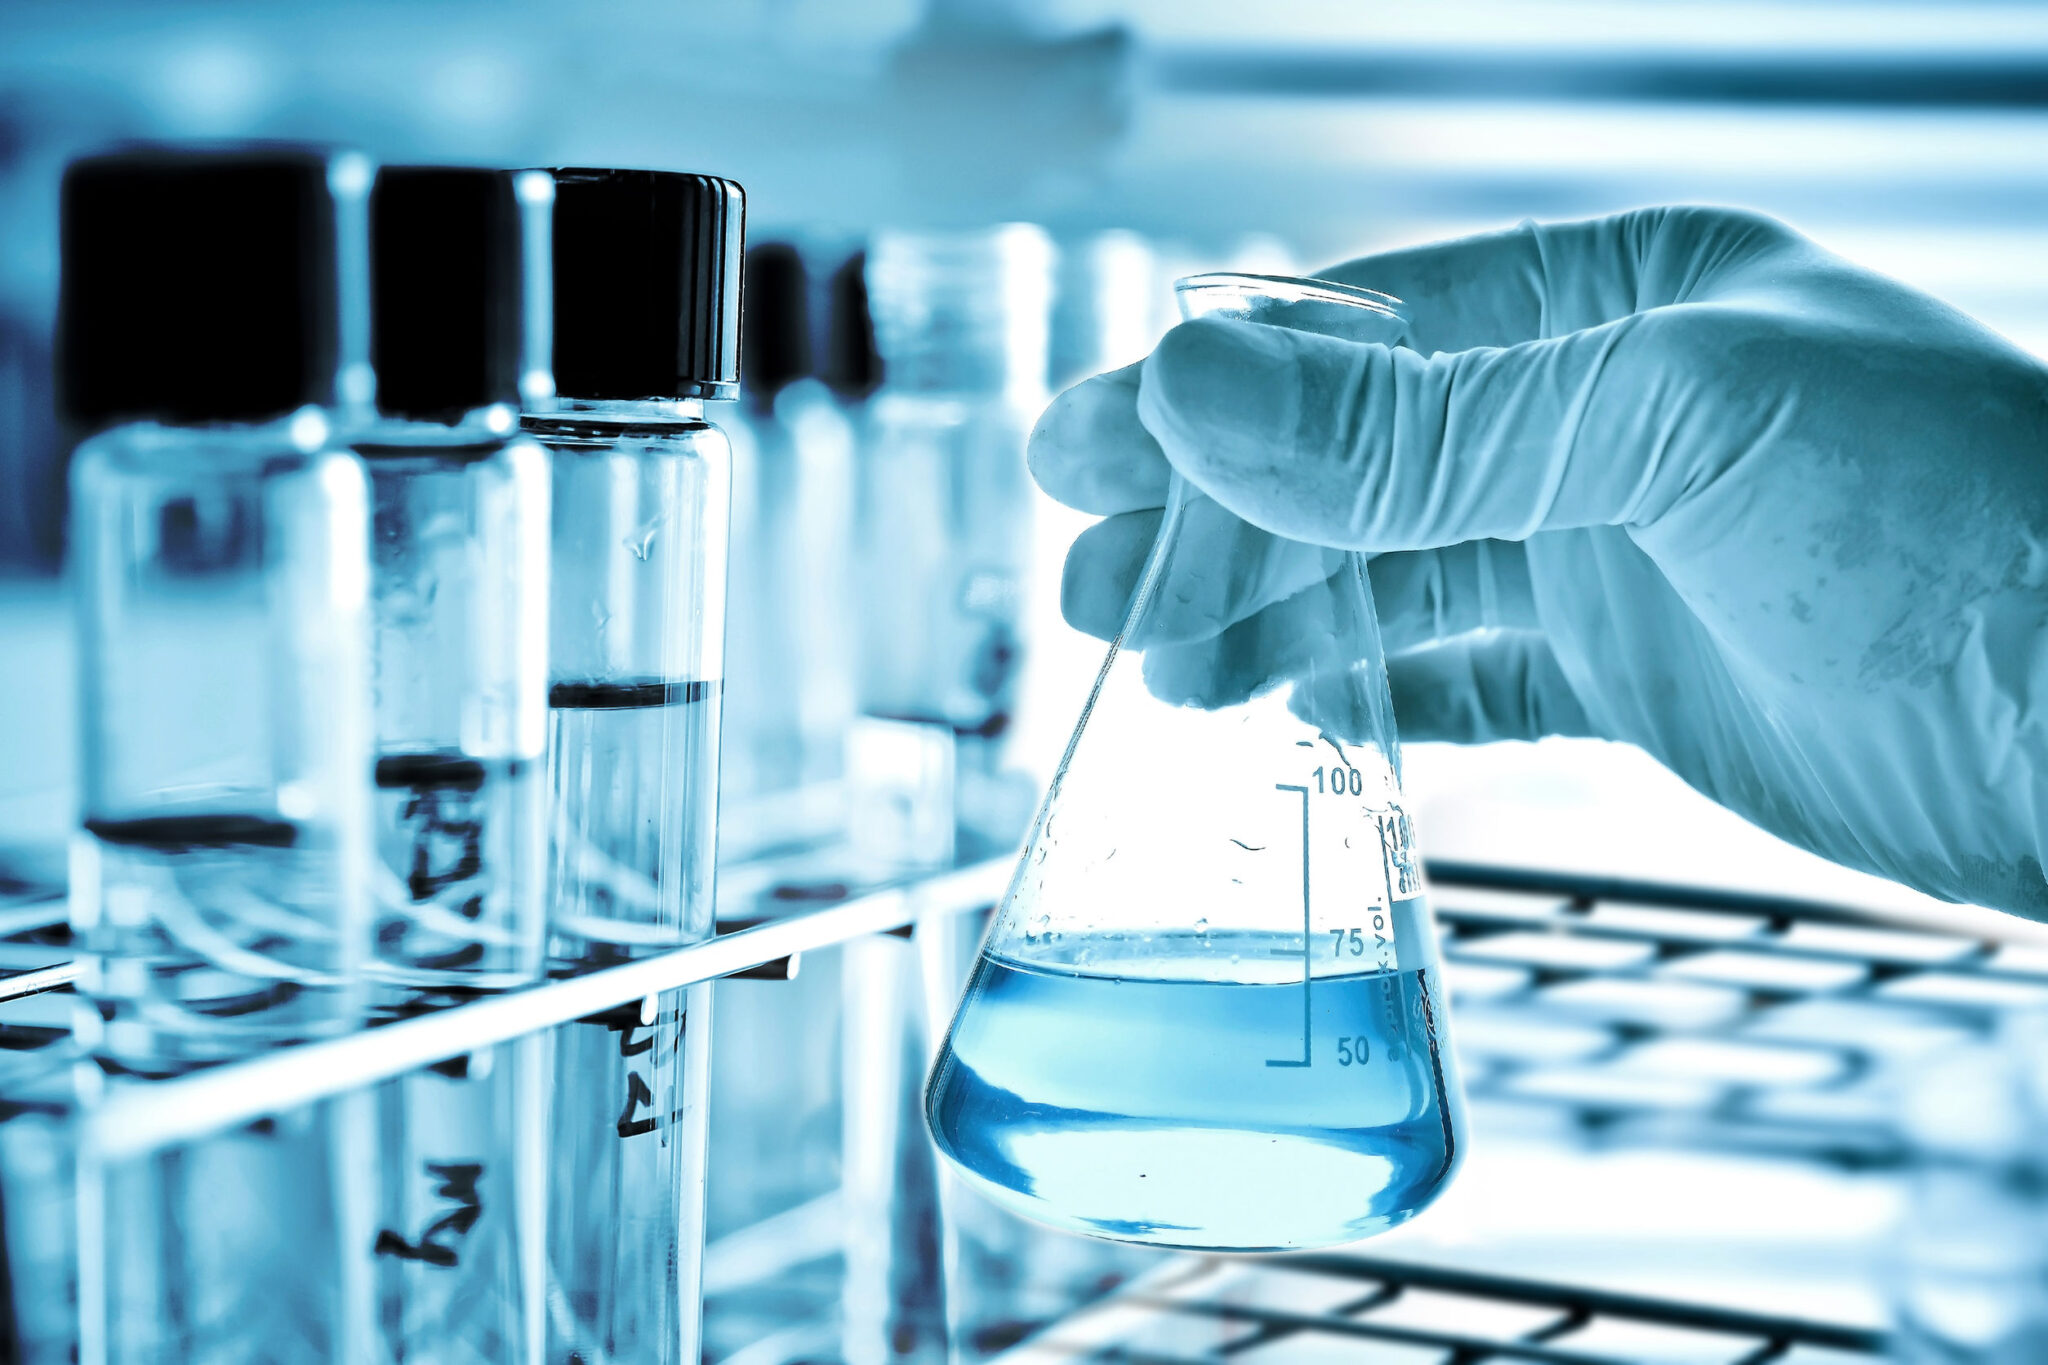 How to Choose the Right Laboratory Chemicals for Your Project